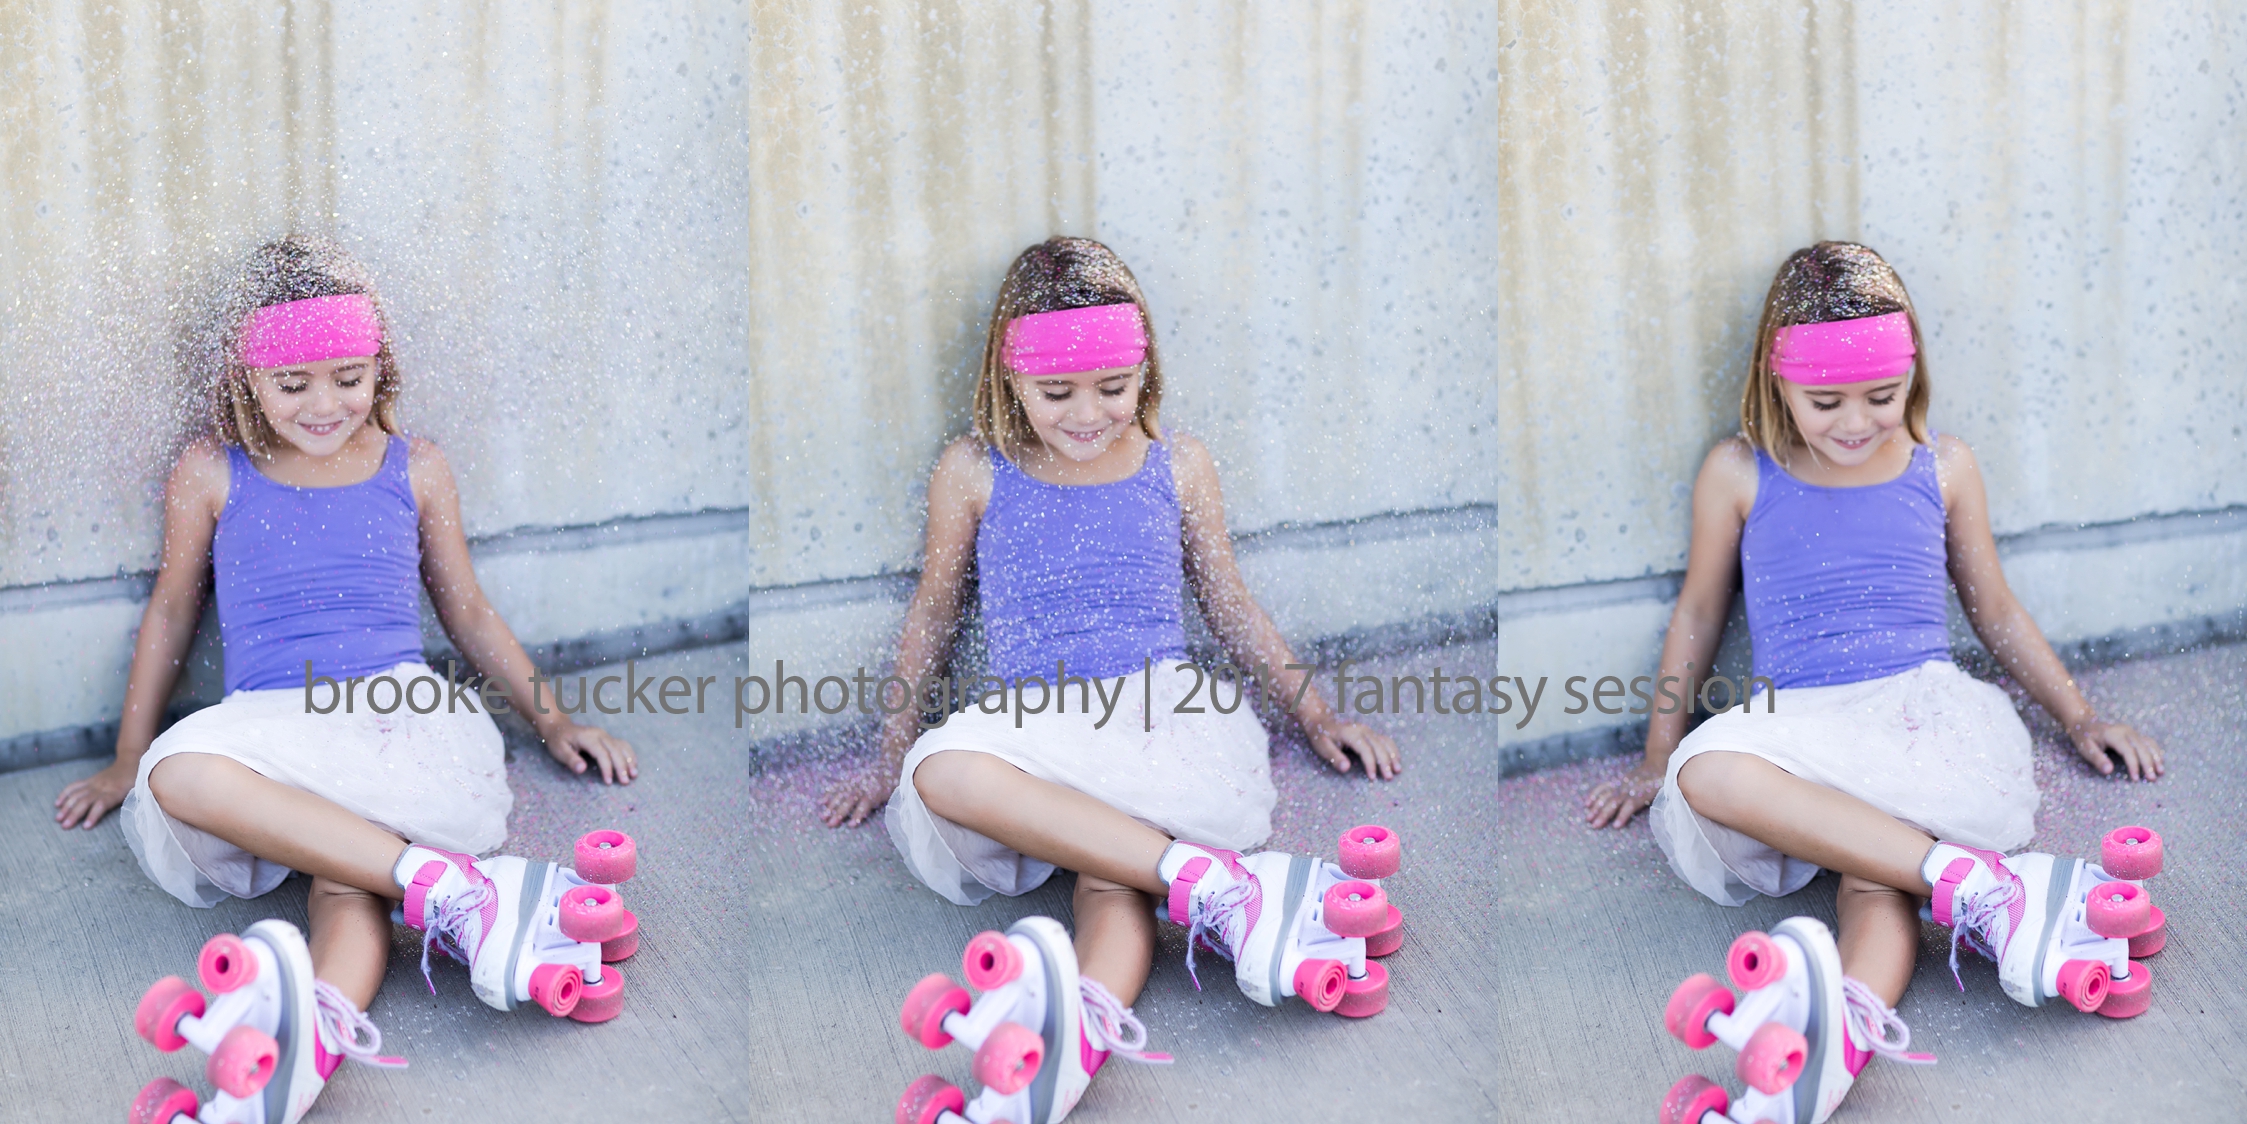 Beautiful and fun all about me roller skating session, orlando florida, brooke tucker photography